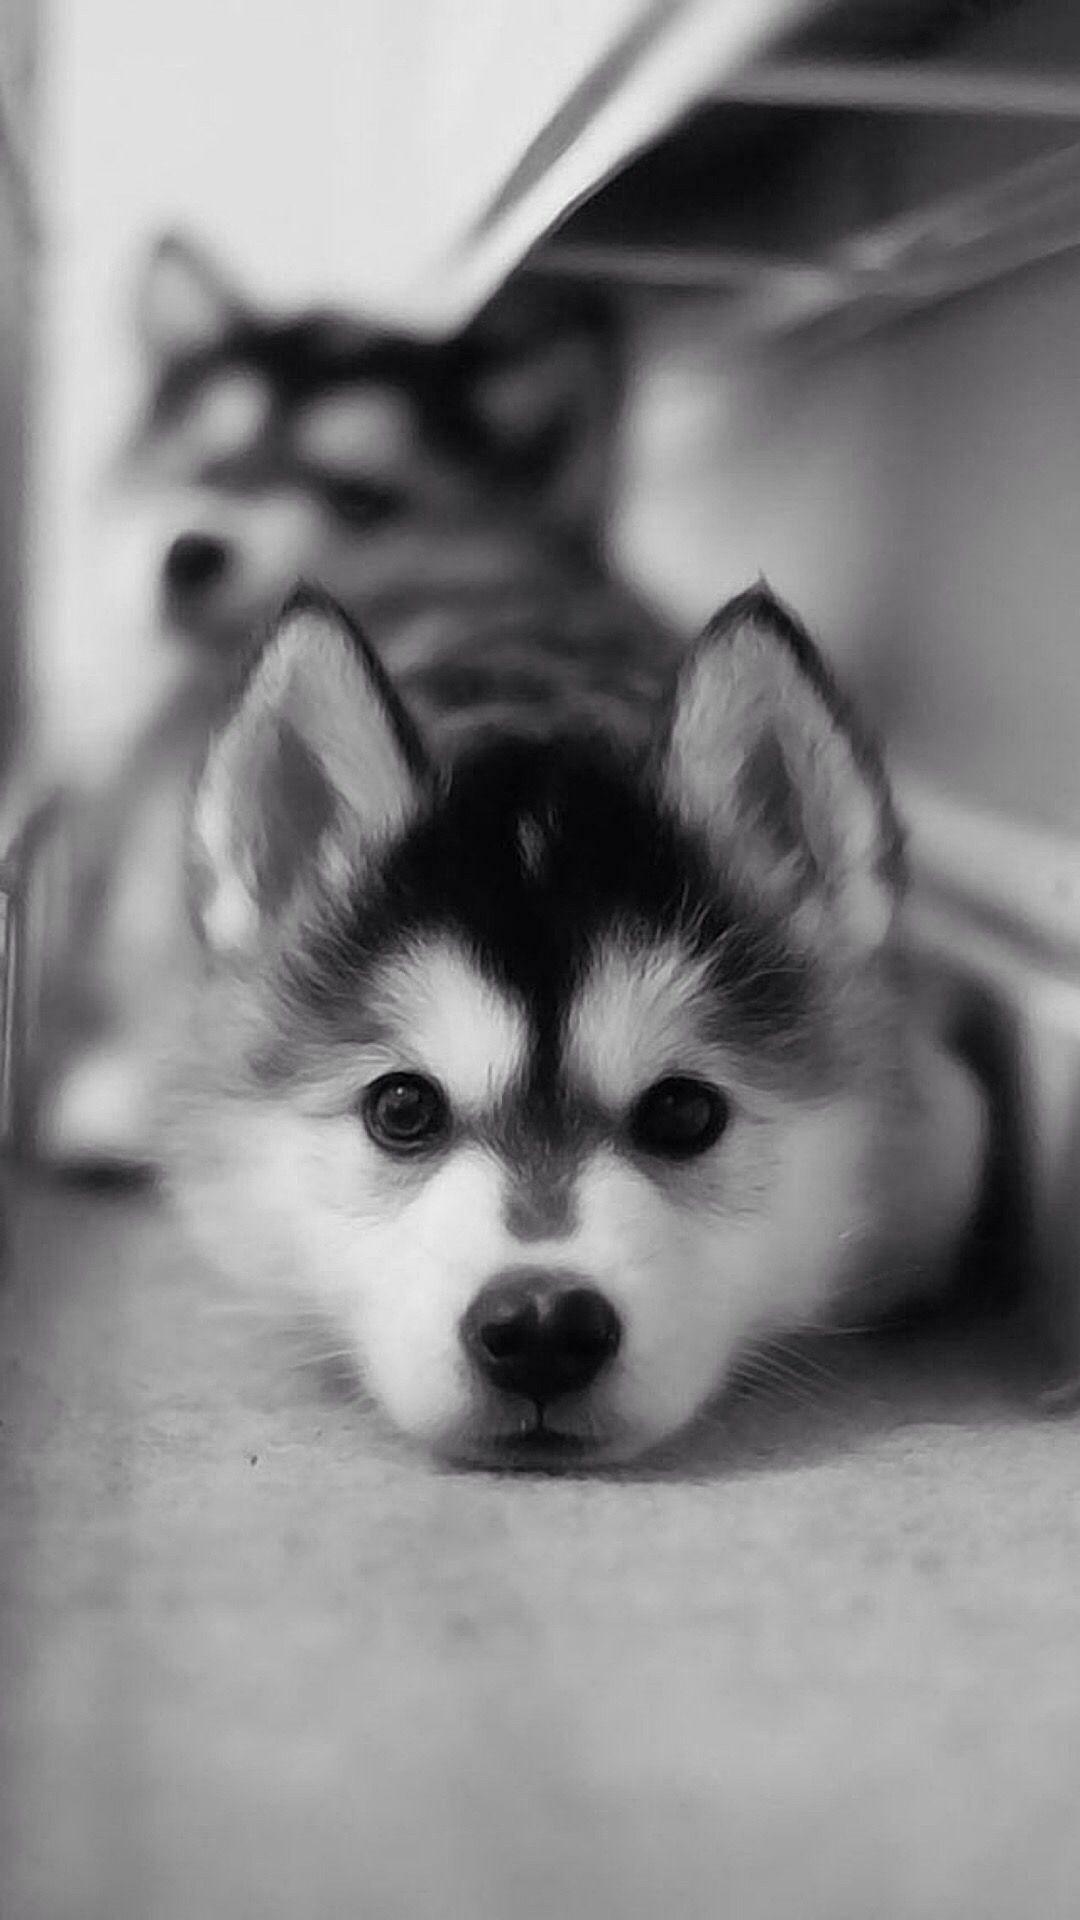 Baby Husky wallpapers, Cute and cuddly, Heart-melting charm, Adorable innocence, 1080x1920 Full HD Phone